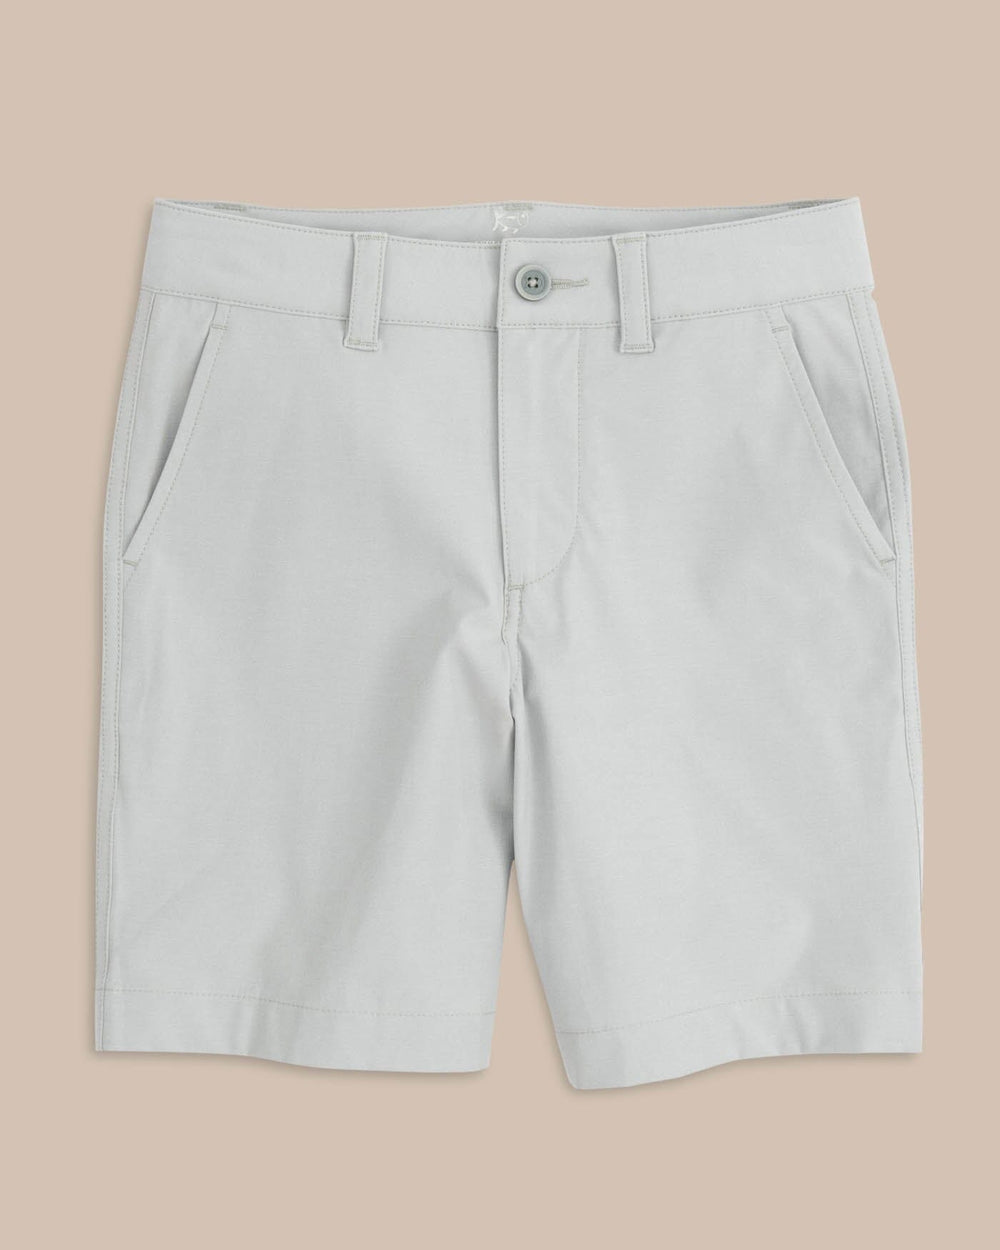 The front view of the Kid's Grey T3 Gulf Short by Southern Tide - Seagull Grey